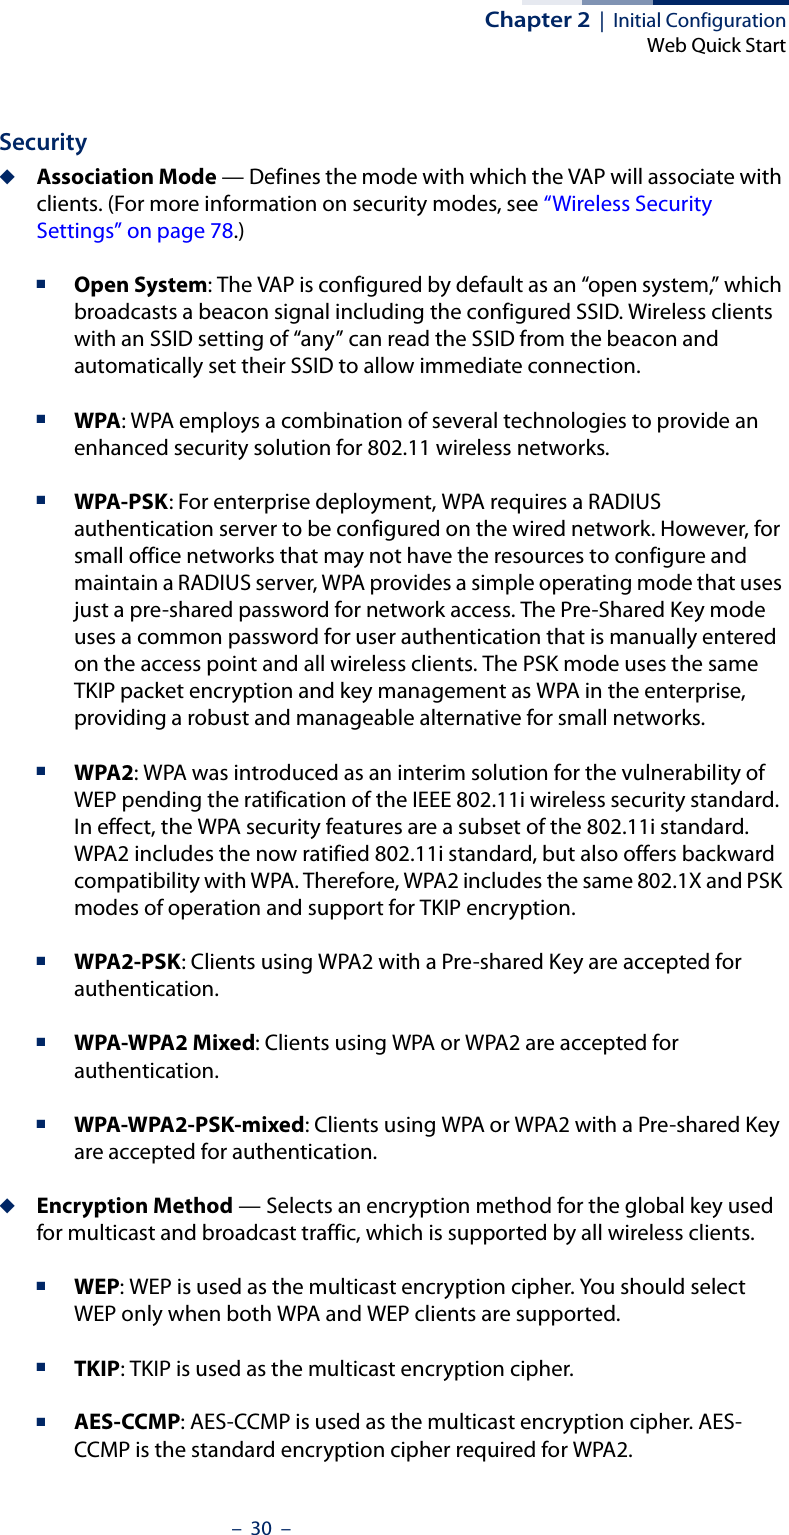 Chapter 2  |  Initial ConfigurationWeb Quick Start–  30  –Security◆Association Mode — Defines the mode with which the VAP will associate with clients. (For more information on security modes, see “Wireless Security Settings” on page 78.)■Open System: The VAP is configured by default as an “open system,” which broadcasts a beacon signal including the configured SSID. Wireless clients with an SSID setting of “any” can read the SSID from the beacon and automatically set their SSID to allow immediate connection. ■WPA: WPA employs a combination of several technologies to provide an enhanced security solution for 802.11 wireless networks.■WPA-PSK: For enterprise deployment, WPA requires a RADIUS authentication server to be configured on the wired network. However, for small office networks that may not have the resources to configure and maintain a RADIUS server, WPA provides a simple operating mode that uses just a pre-shared password for network access. The Pre-Shared Key mode uses a common password for user authentication that is manually entered on the access point and all wireless clients. The PSK mode uses the same TKIP packet encryption and key management as WPA in the enterprise, providing a robust and manageable alternative for small networks.■WPA2: WPA was introduced as an interim solution for the vulnerability of WEP pending the ratification of the IEEE 802.11i wireless security standard. In effect, the WPA security features are a subset of the 802.11i standard. WPA2 includes the now ratified 802.11i standard, but also offers backward compatibility with WPA. Therefore, WPA2 includes the same 802.1X and PSK modes of operation and support for TKIP encryption. ■WPA2-PSK: Clients using WPA2 with a Pre-shared Key are accepted for authentication.■WPA-WPA2 Mixed: Clients using WPA or WPA2 are accepted for authentication.■WPA-WPA2-PSK-mixed: Clients using WPA or WPA2 with a Pre-shared Key are accepted for authentication.◆Encryption Method — Selects an encryption method for the global key used for multicast and broadcast traffic, which is supported by all wireless clients.■WEP: WEP is used as the multicast encryption cipher. You should select WEP only when both WPA and WEP clients are supported. ■TKIP: TKIP is used as the multicast encryption cipher.■AES-CCMP: AES-CCMP is used as the multicast encryption cipher. AES-CCMP is the standard encryption cipher required for WPA2.